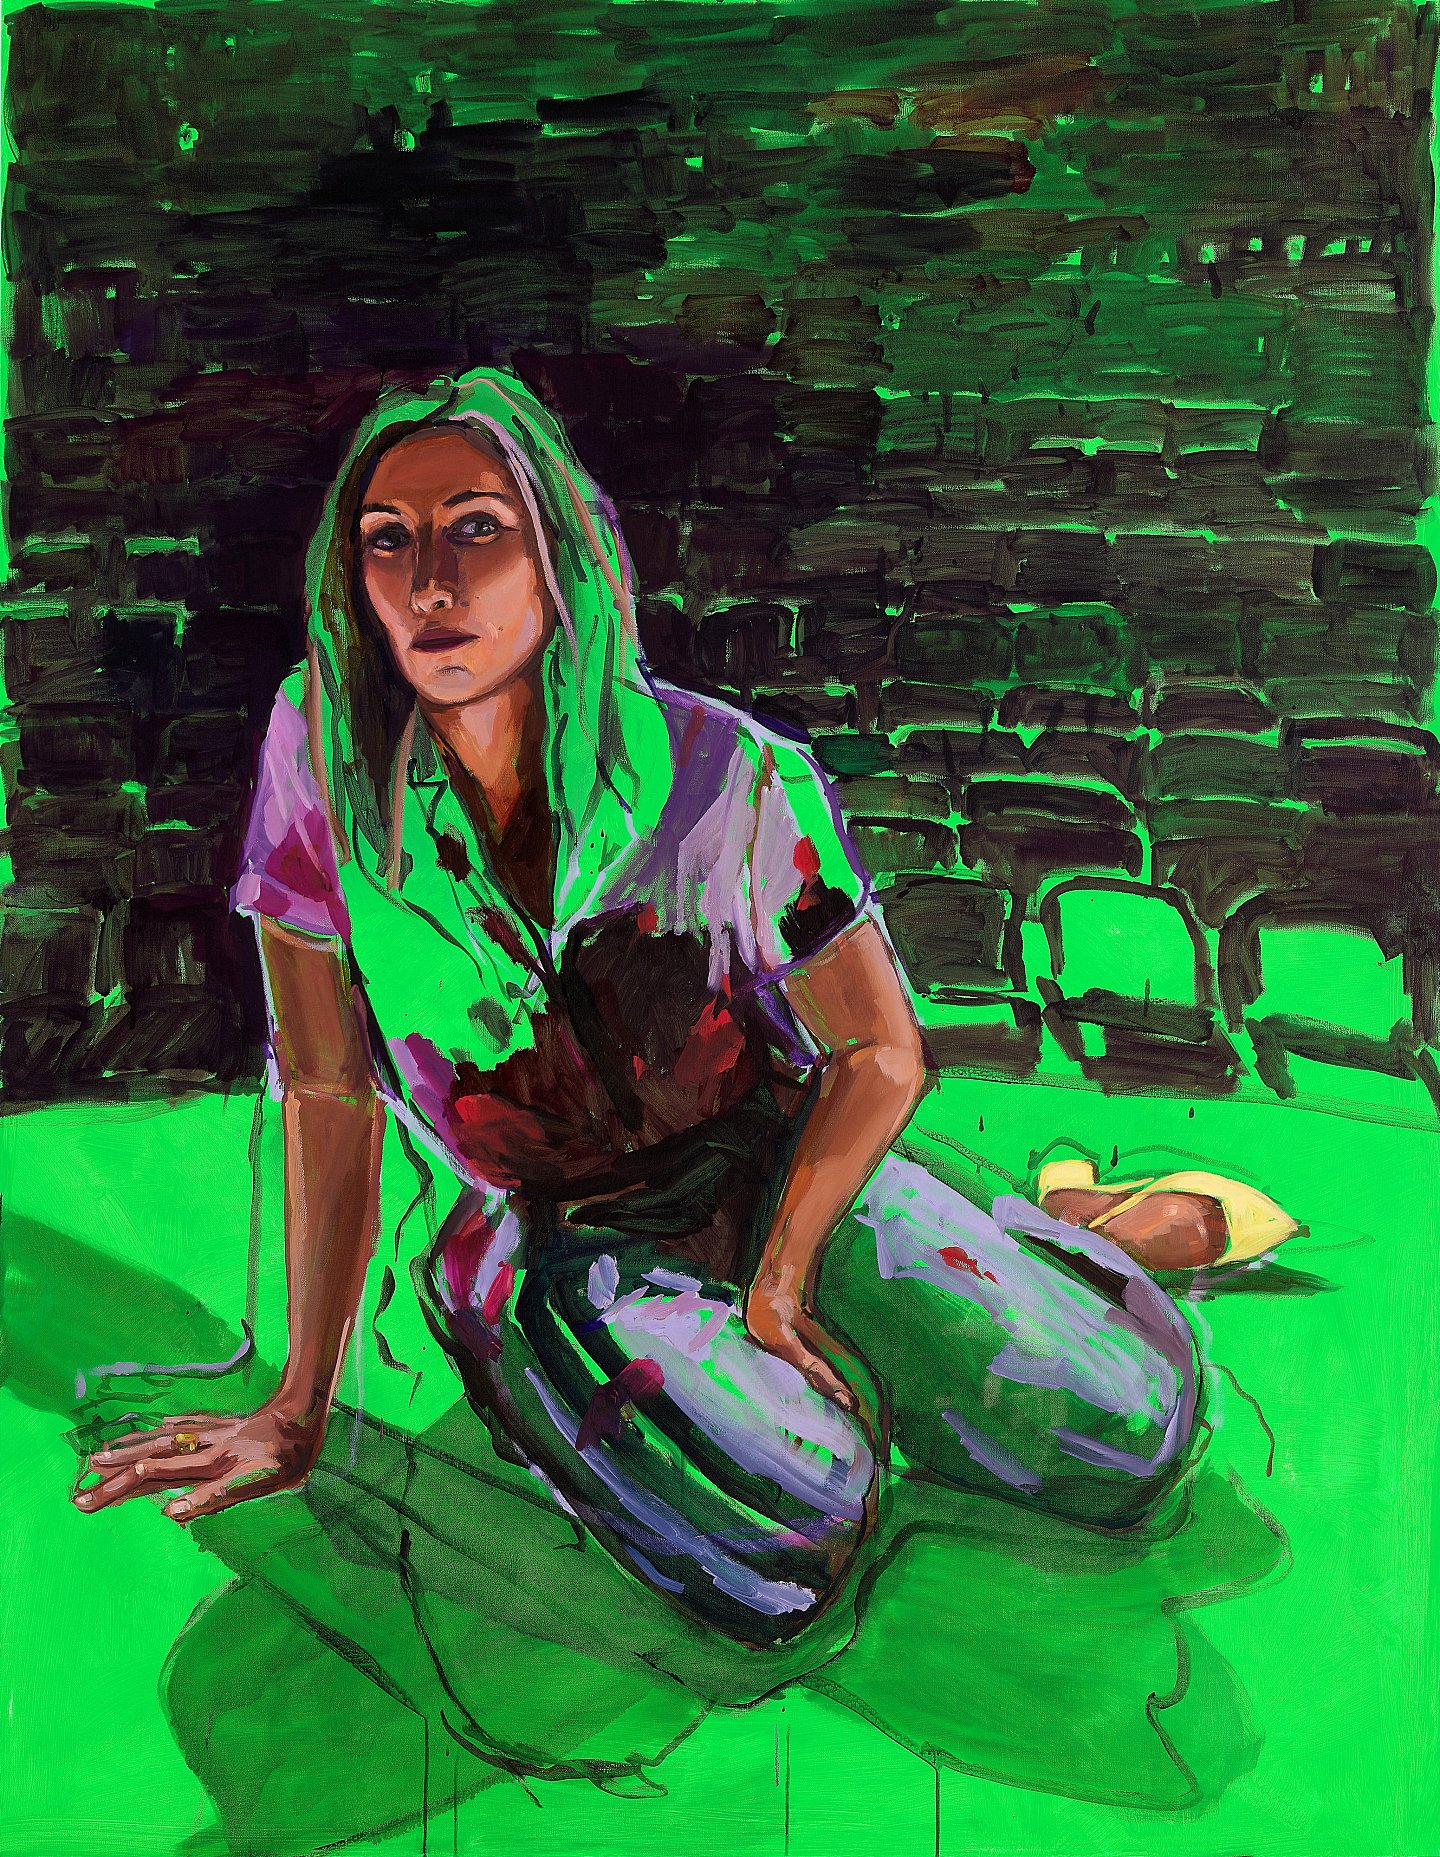 A vivid green semi-realistic portrait of Claudia Karvan, a middle-aged white woman with long hair, seated on a theatre stage.